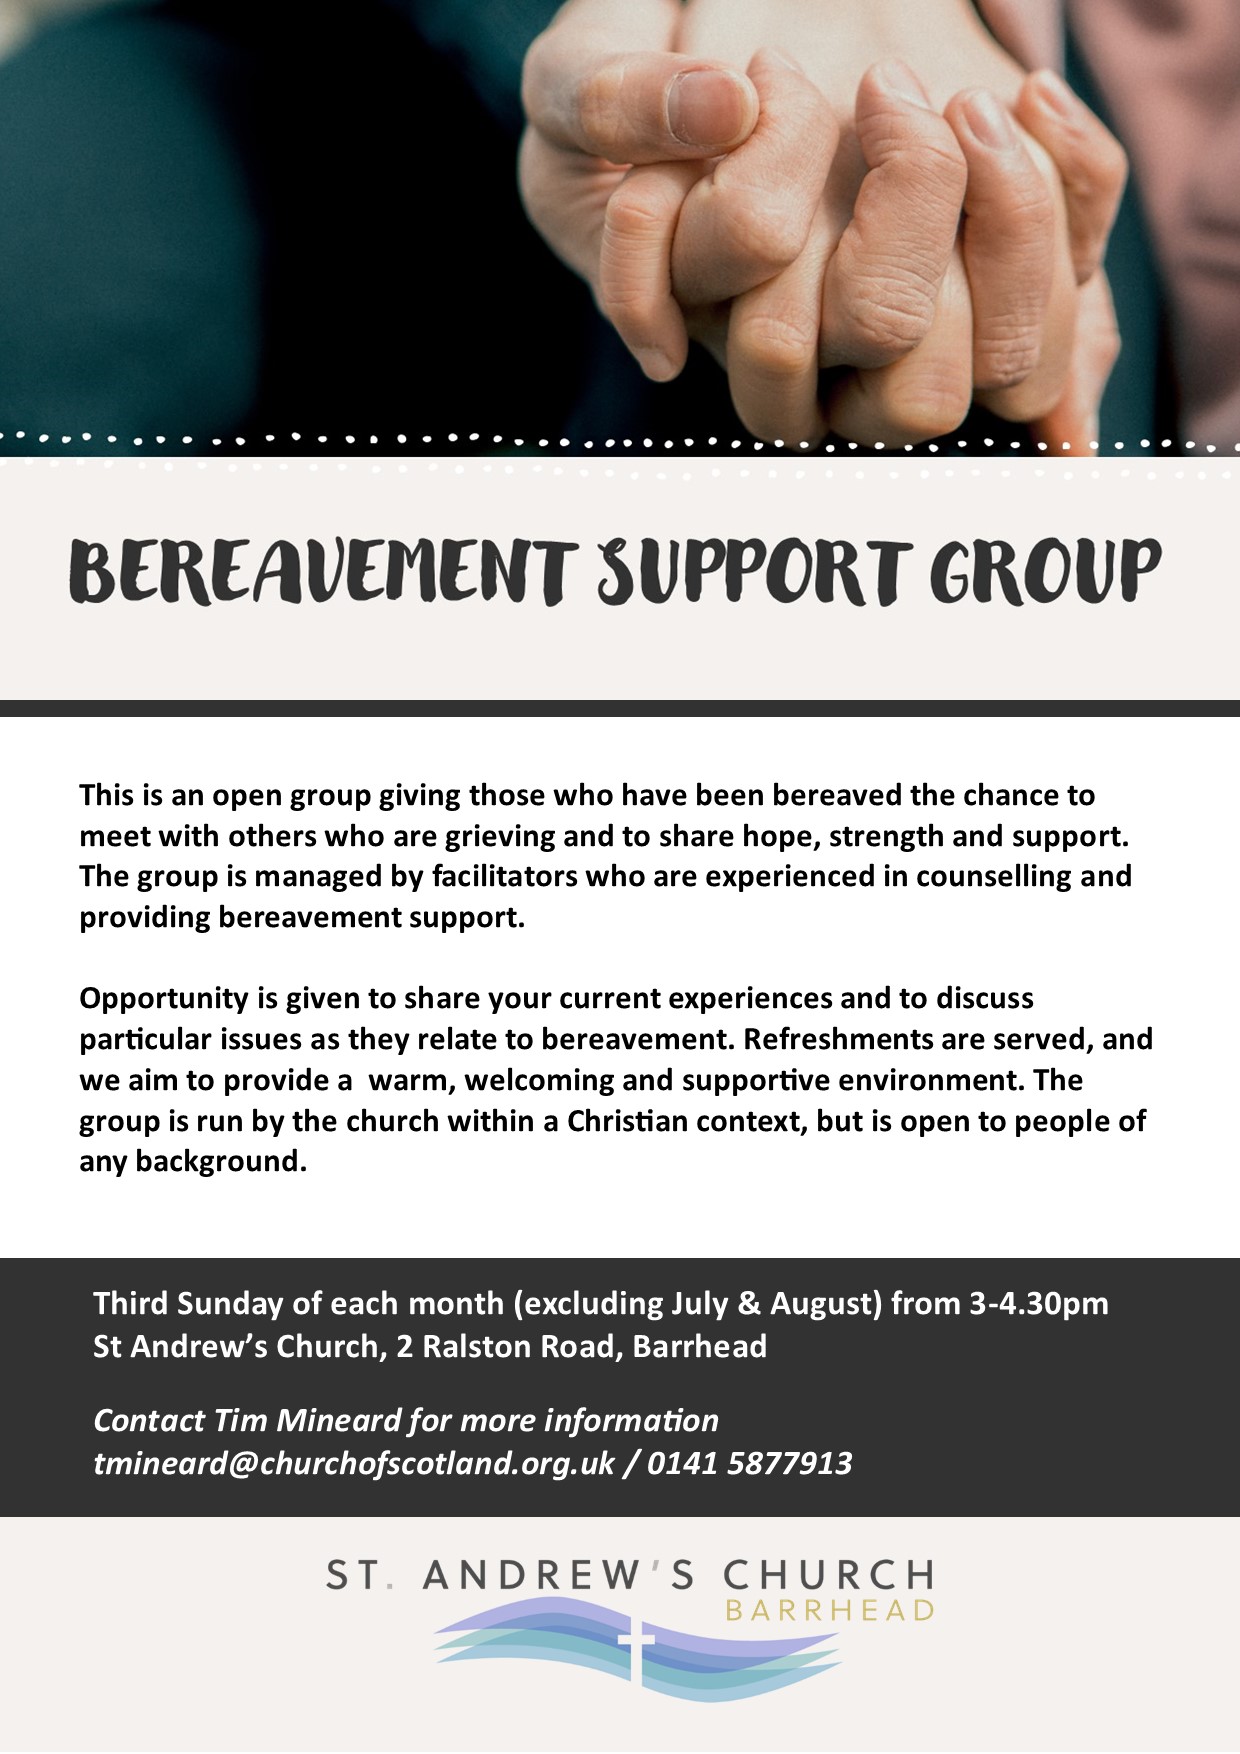 Bereavement support group